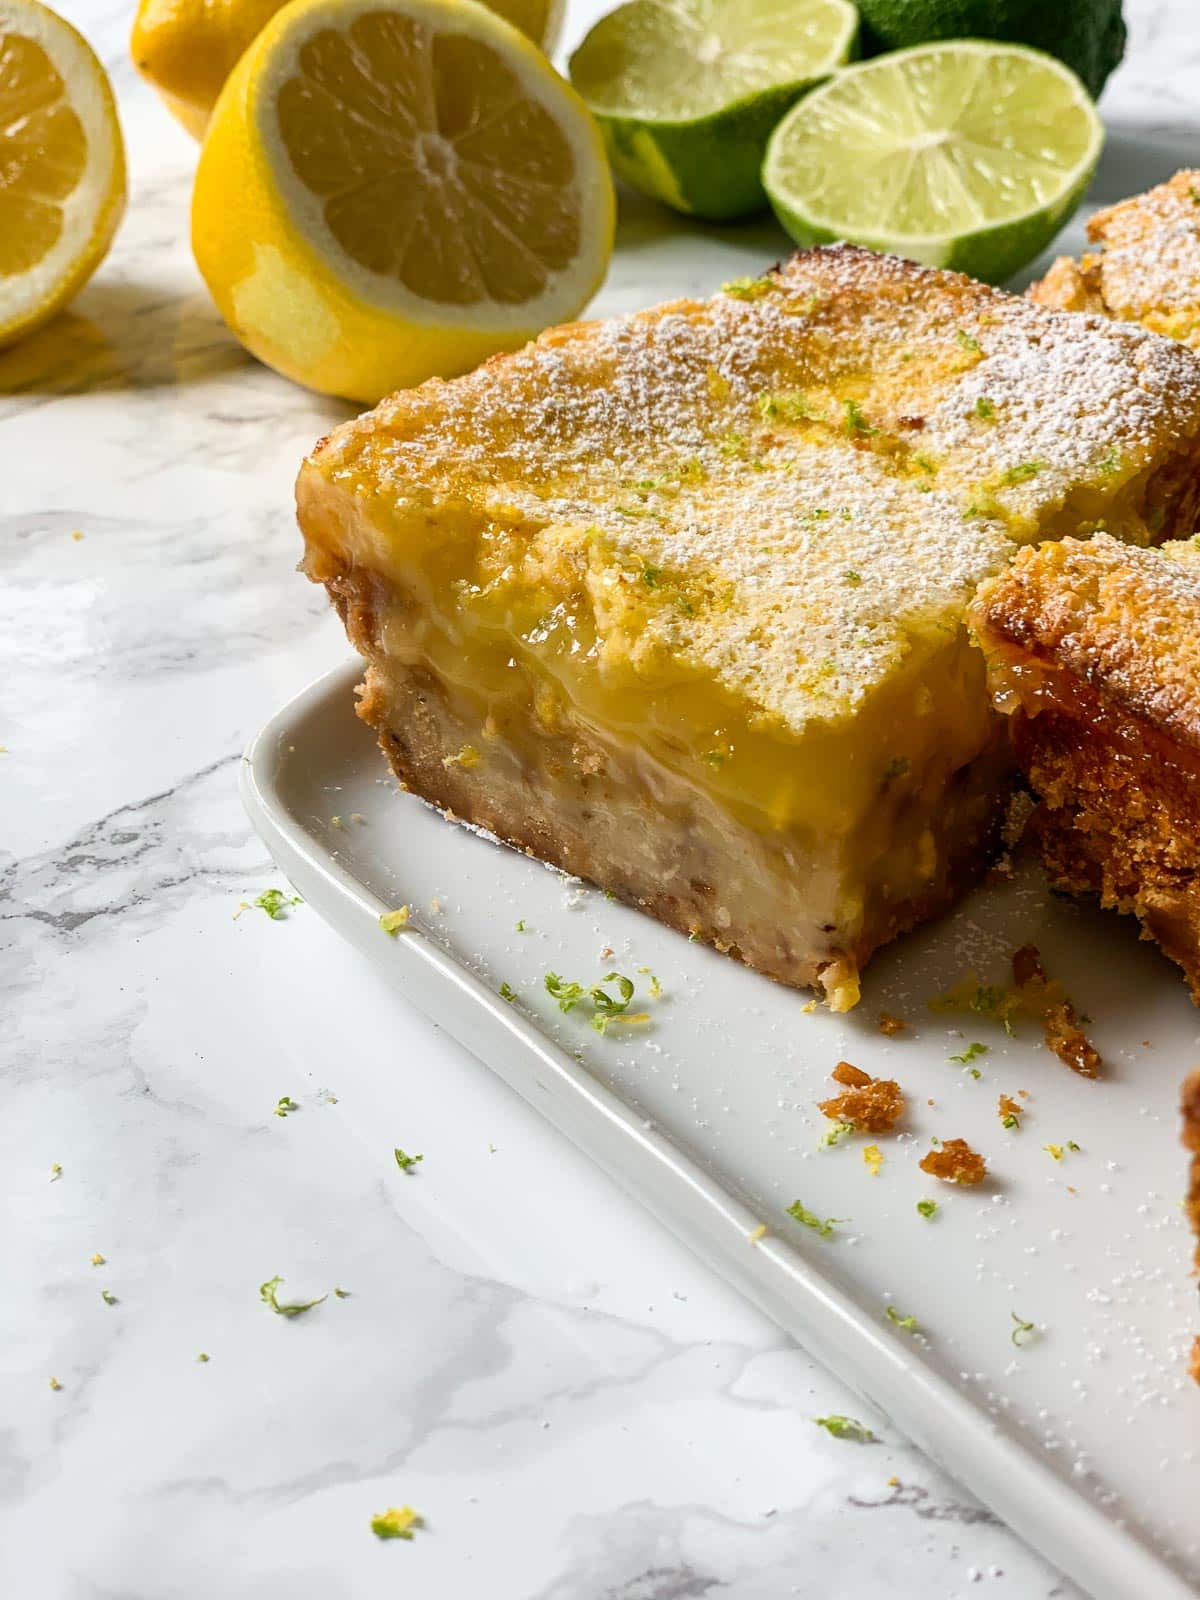 Close up of a lemon bar on a plate with crumbs.